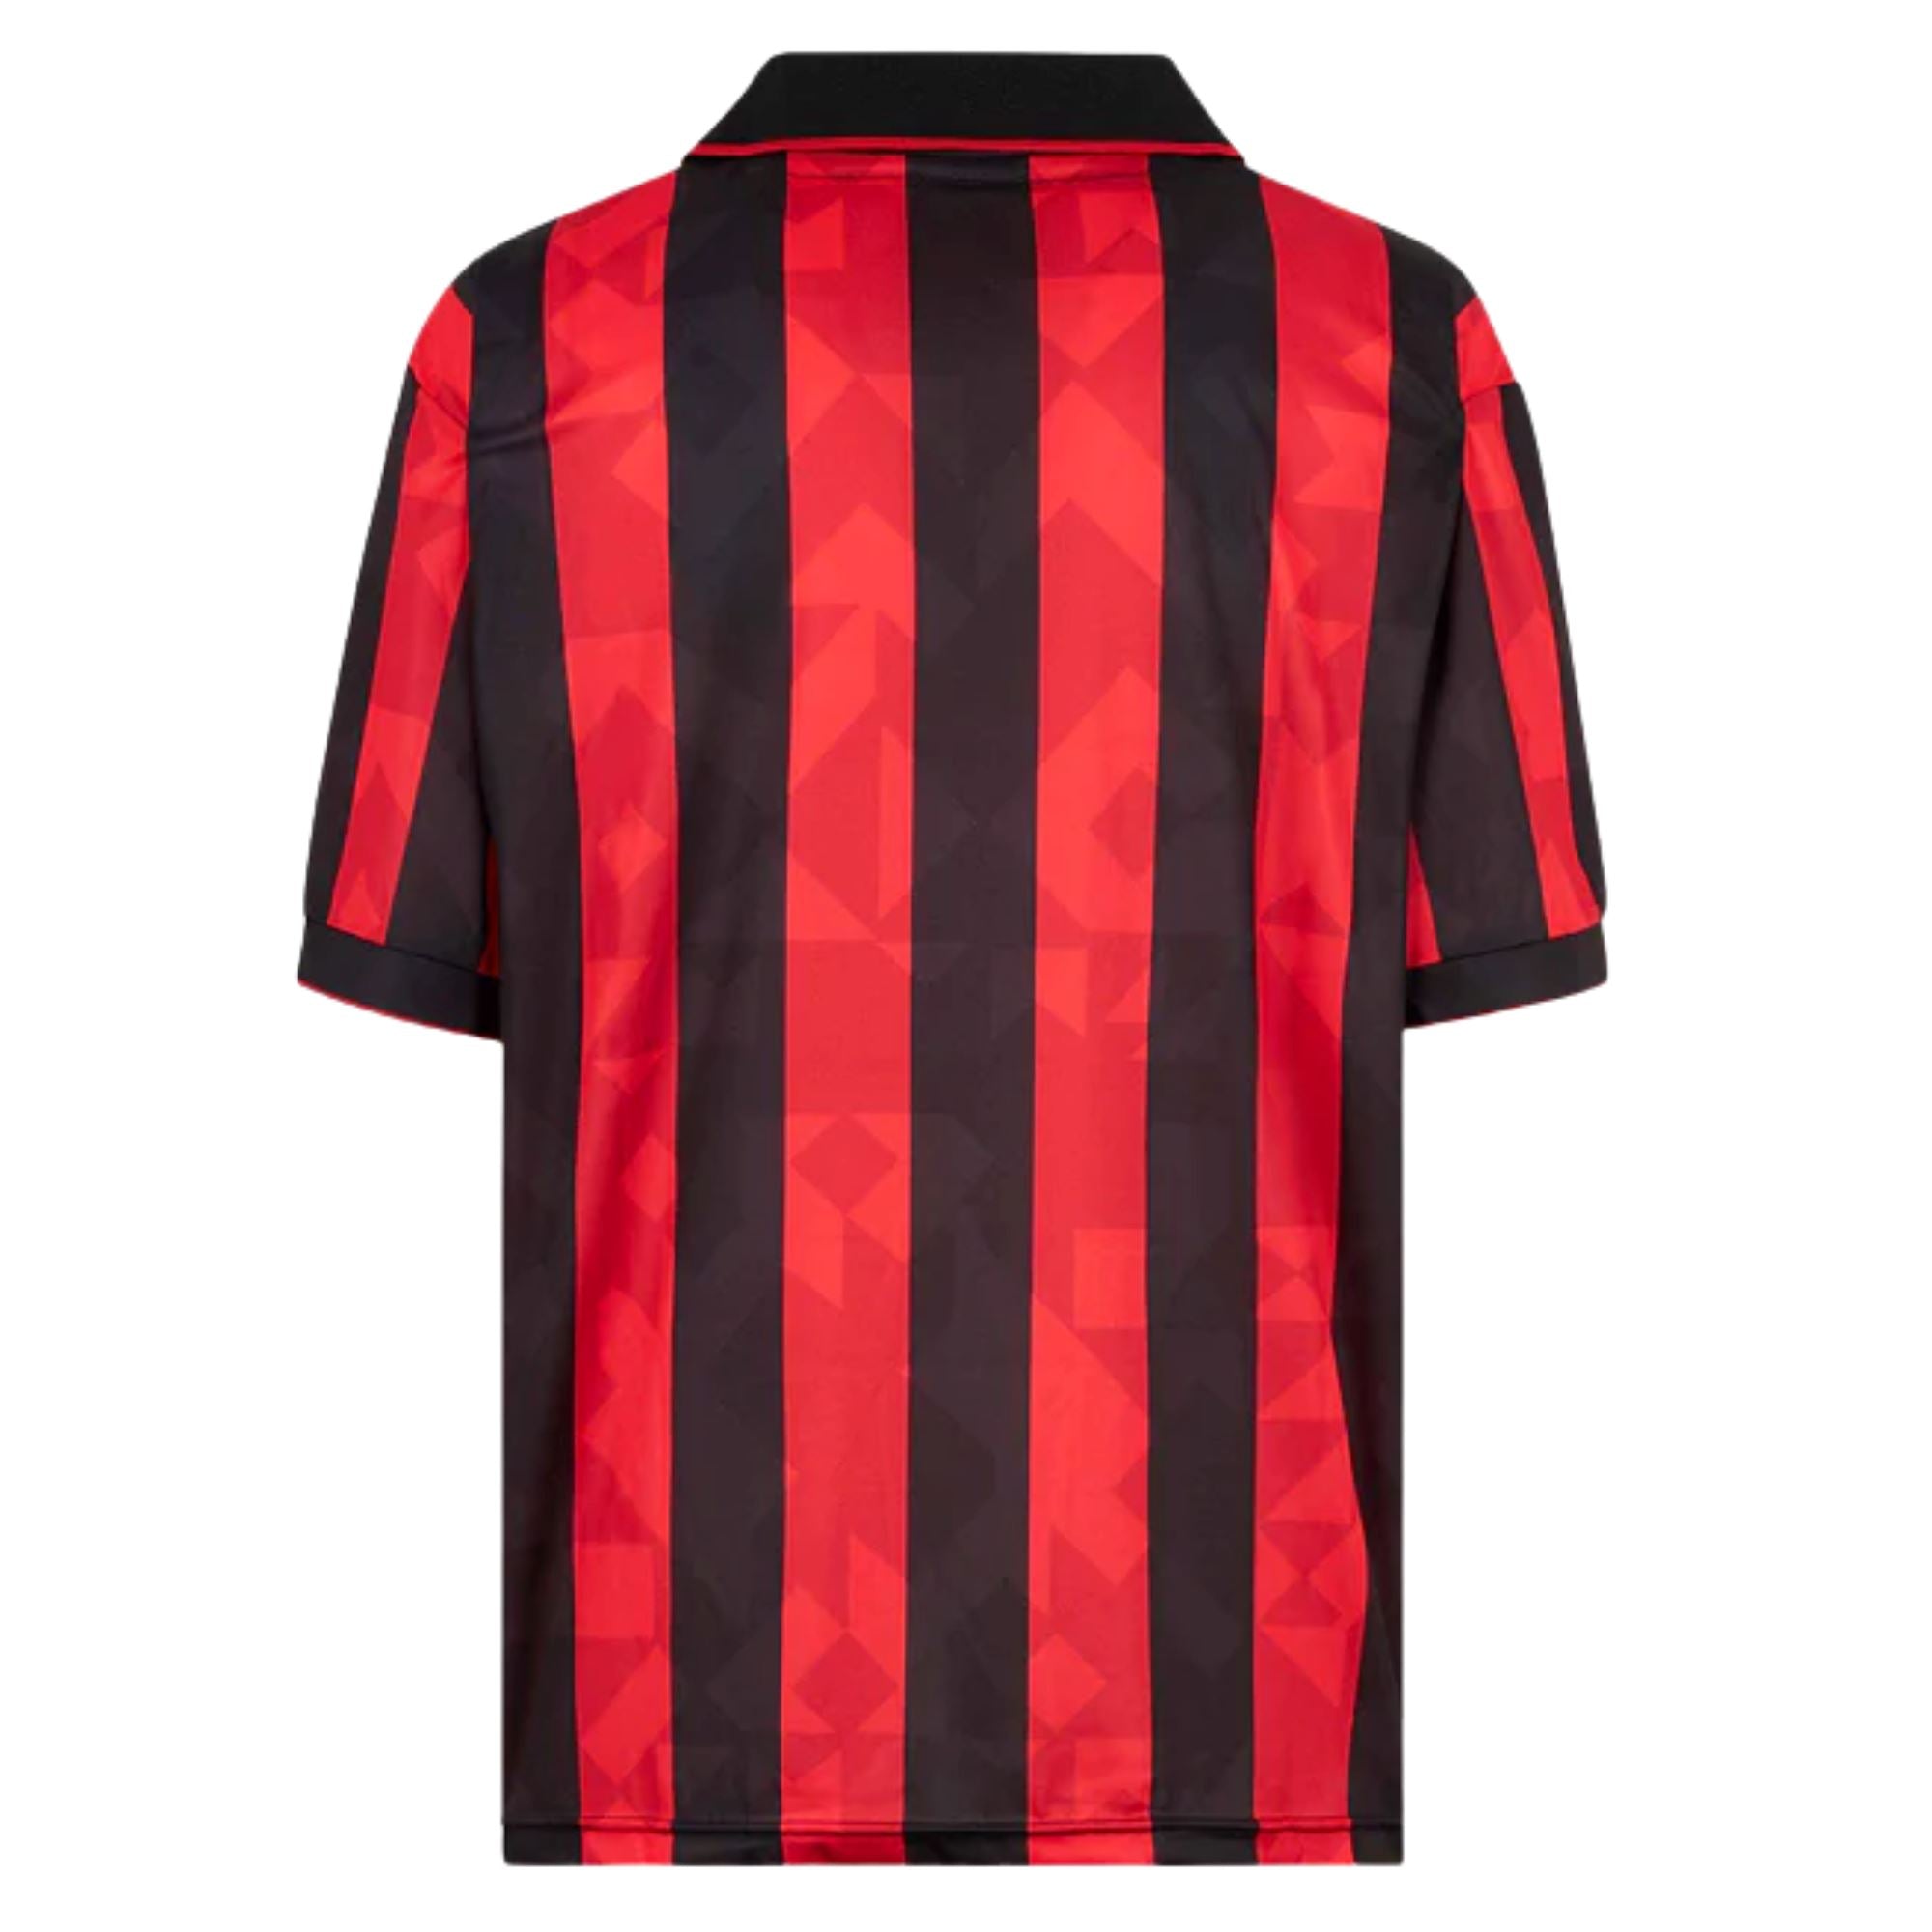 Milan Historical Home Jersey Champions League Final 1993/94